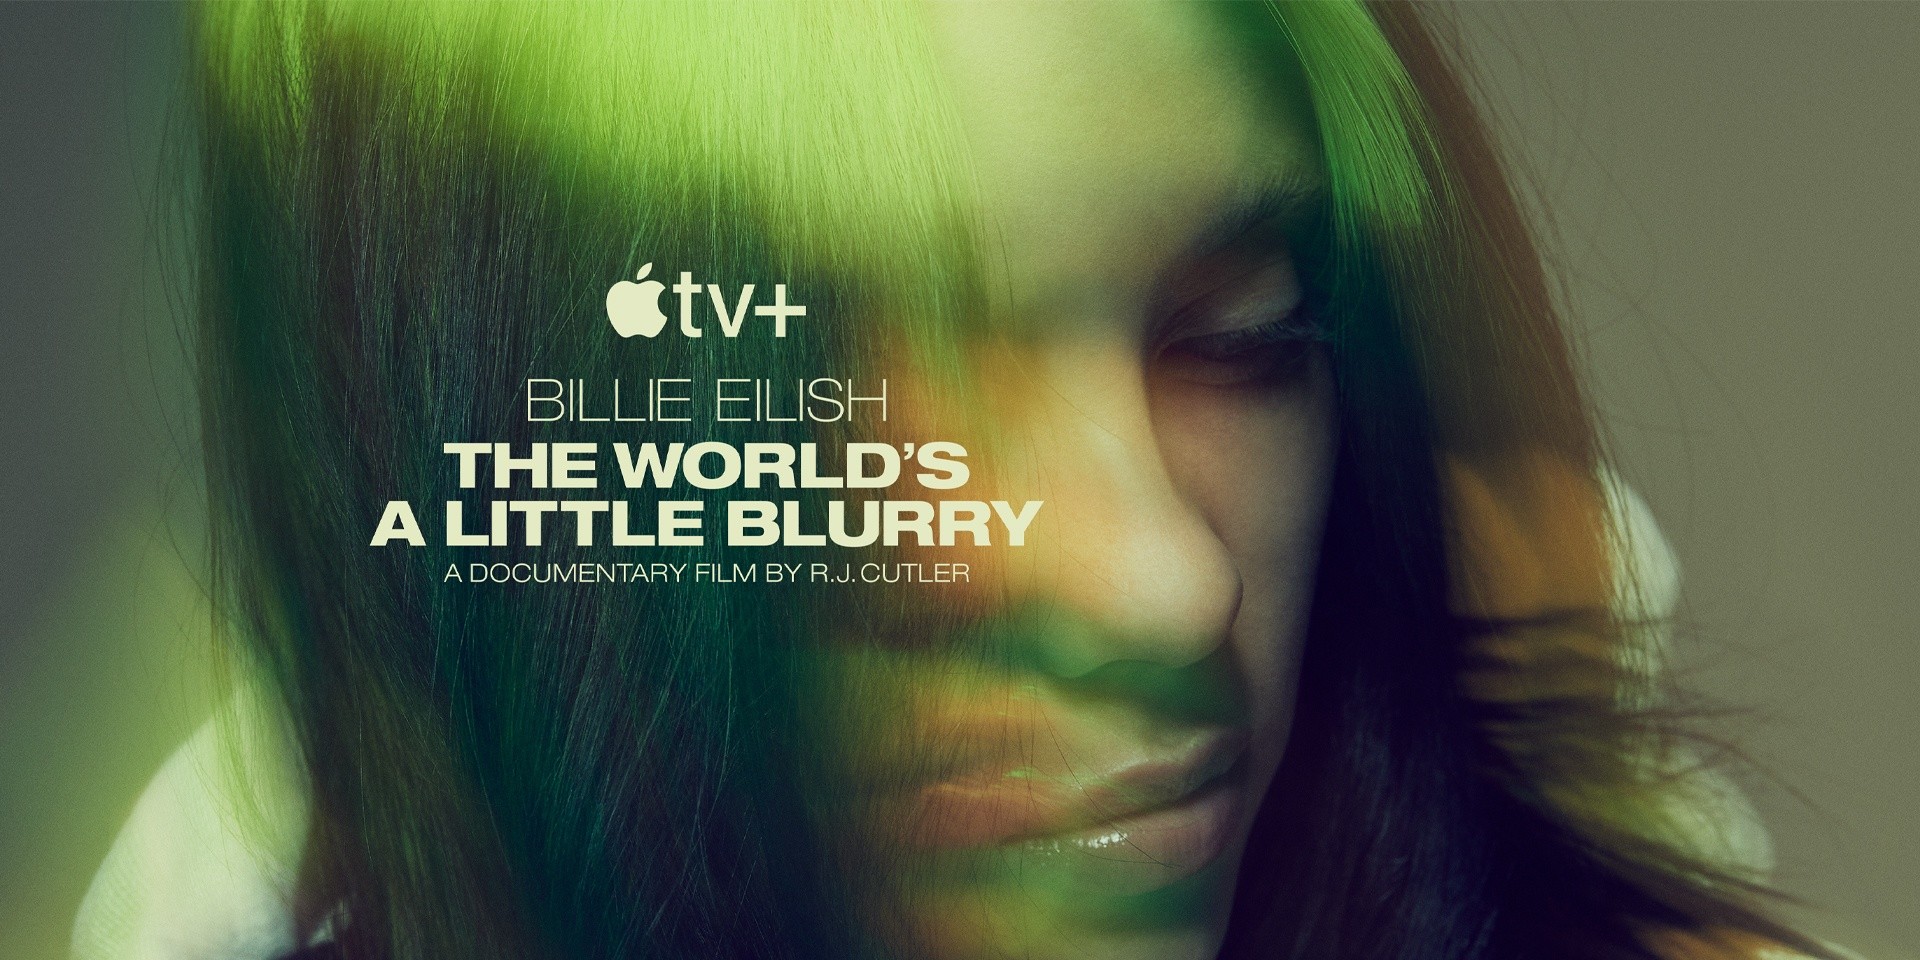 Billie Eilish's feature-length documentary The World's A Little Blurry is coming this February